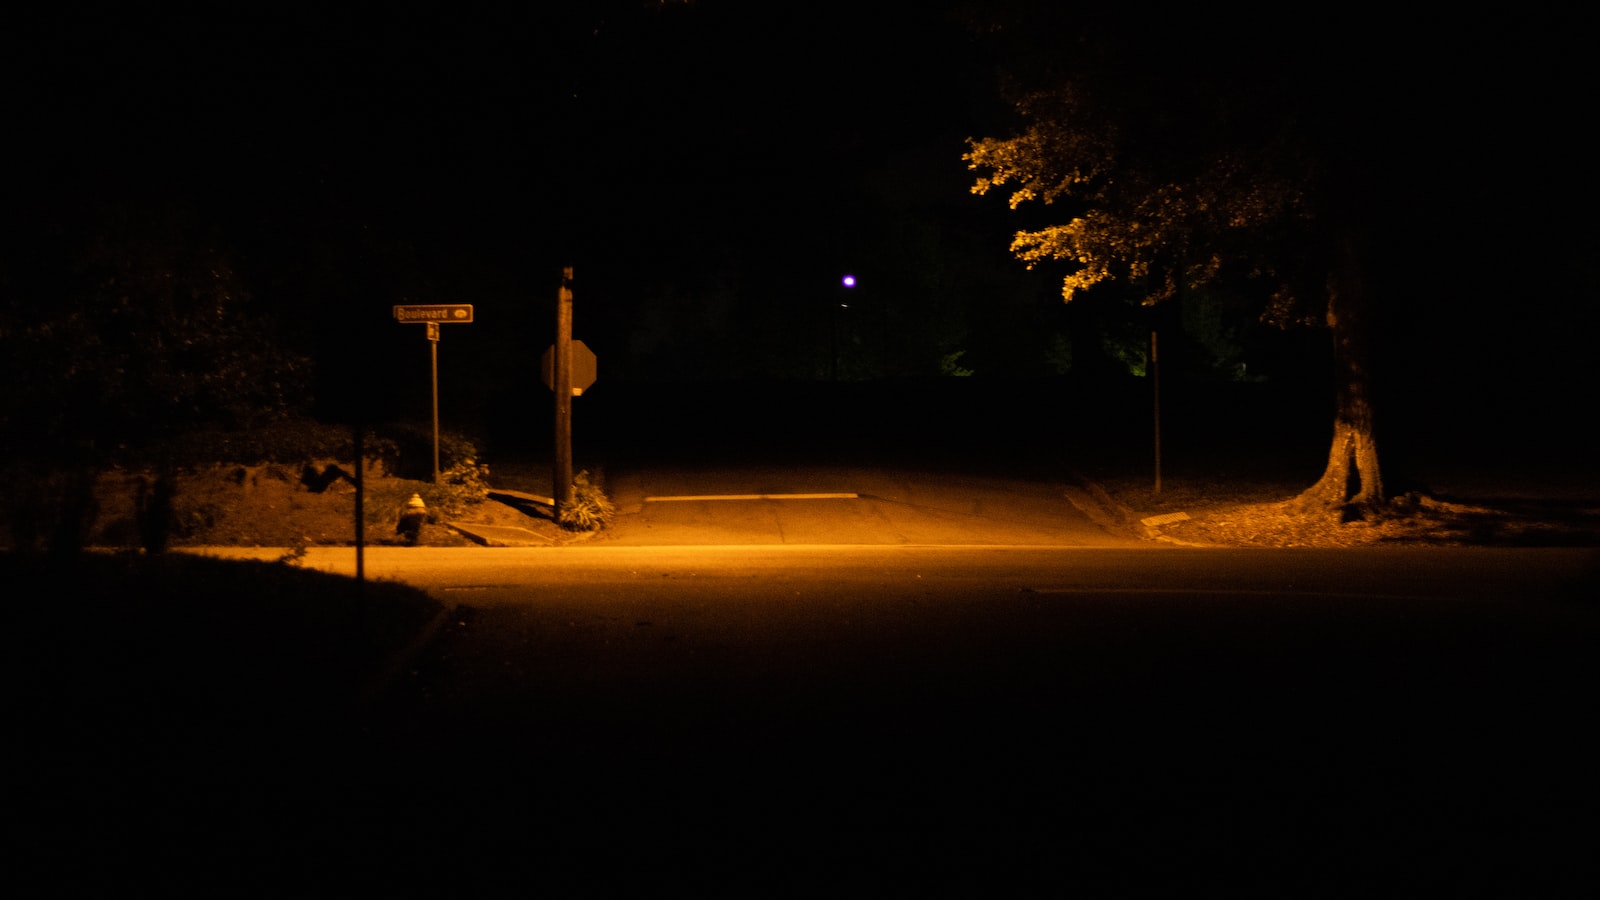 Lighting Up Your Instagram: Street Light Captions To Steal The Spotlight